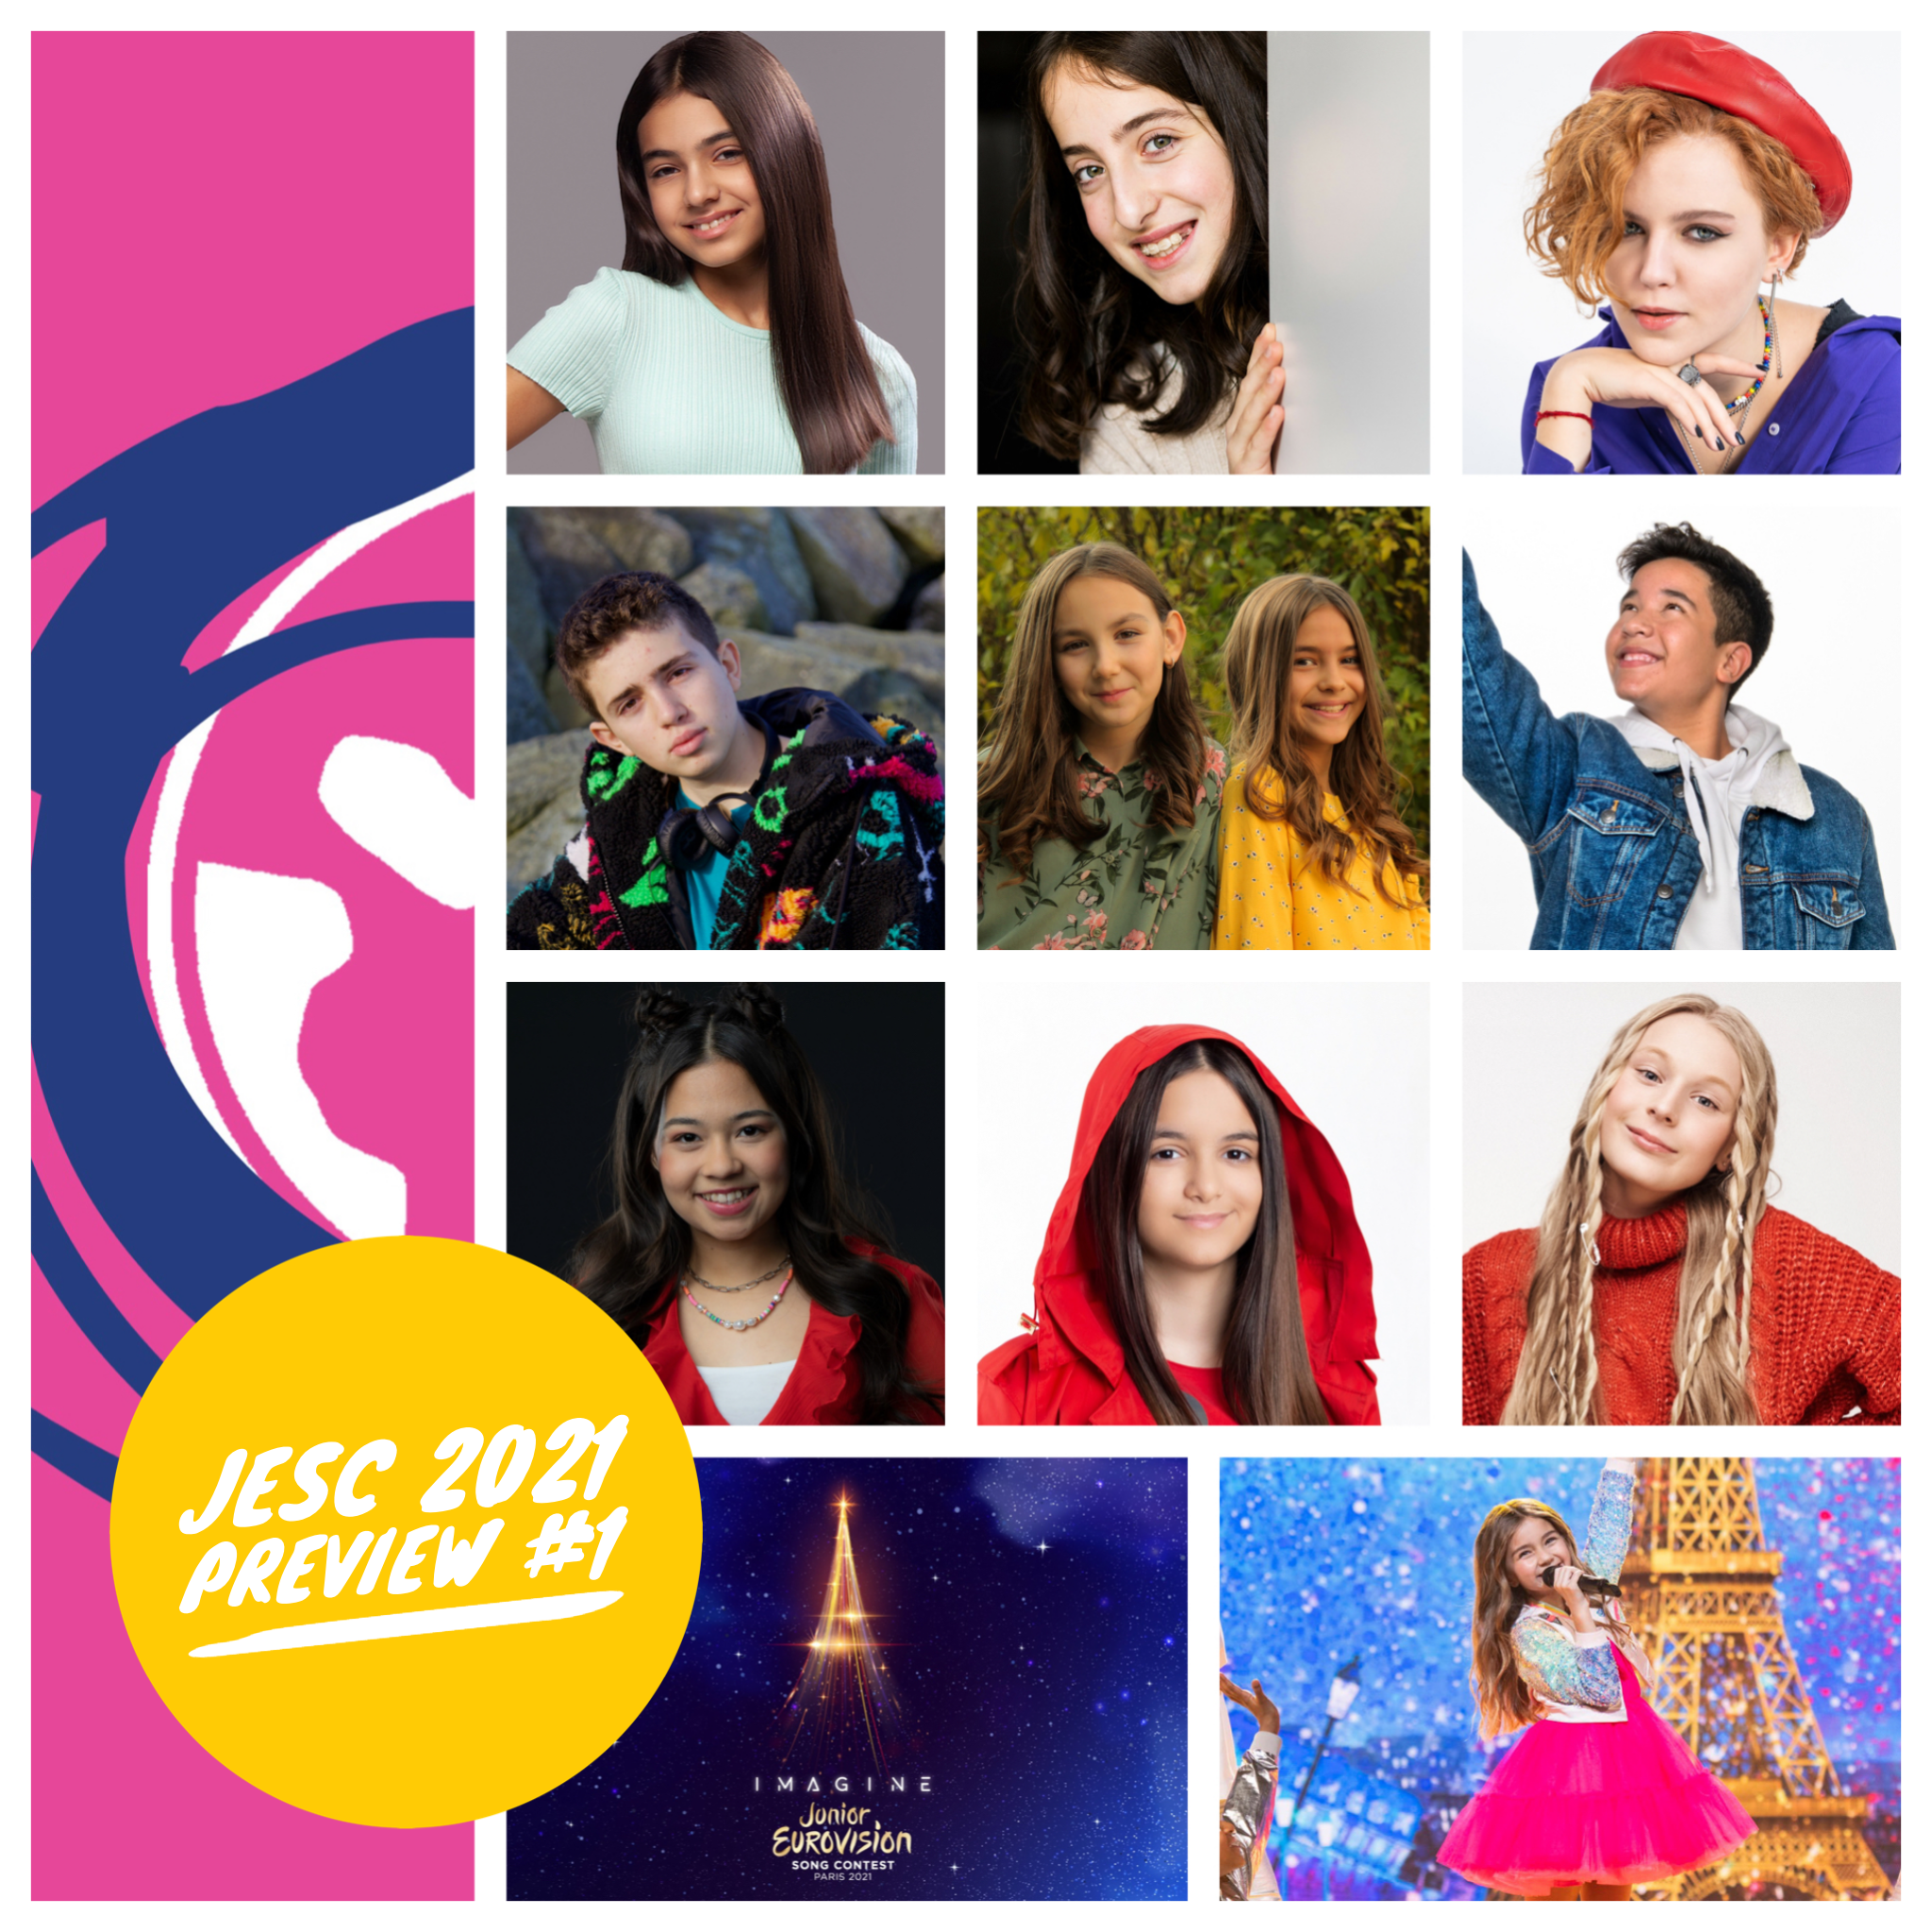 Junior Eurovision Song Contest 2021 Preview #1